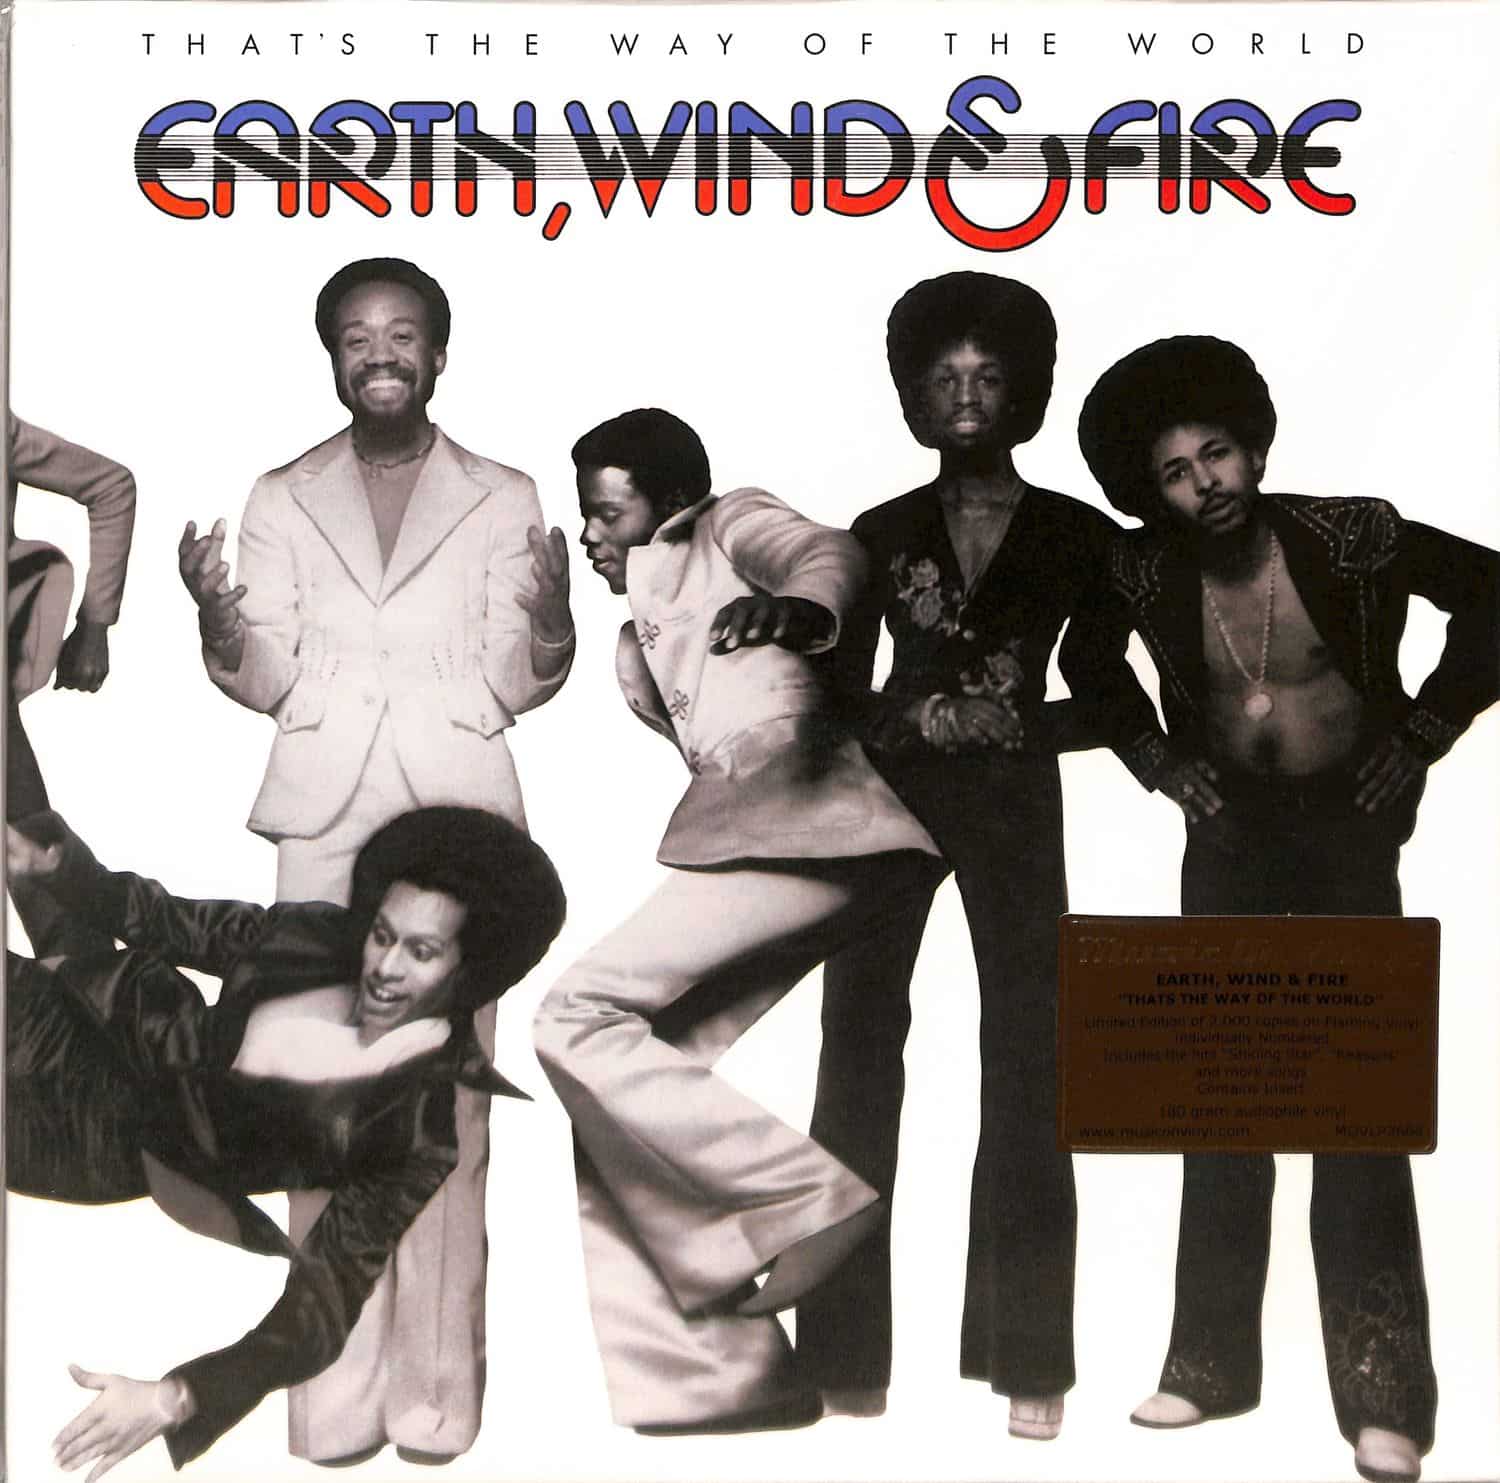 Earth, Wind & Fire - THATS THE WAY OF THE WORLD 